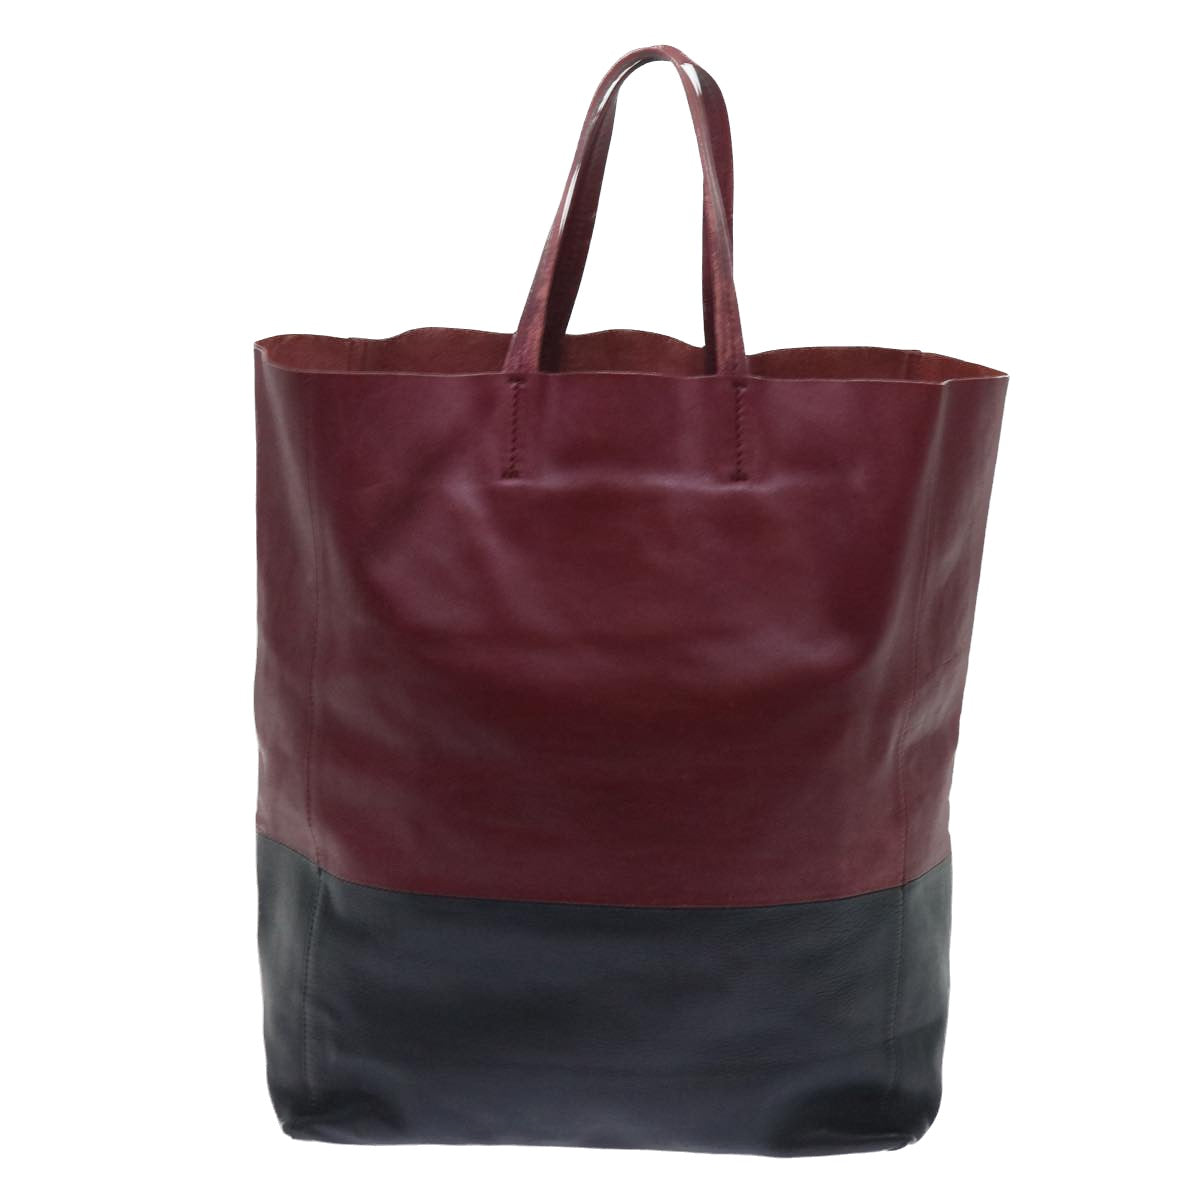 CELINE Tote Bag Leather Wine Red Auth bs7779 - 0